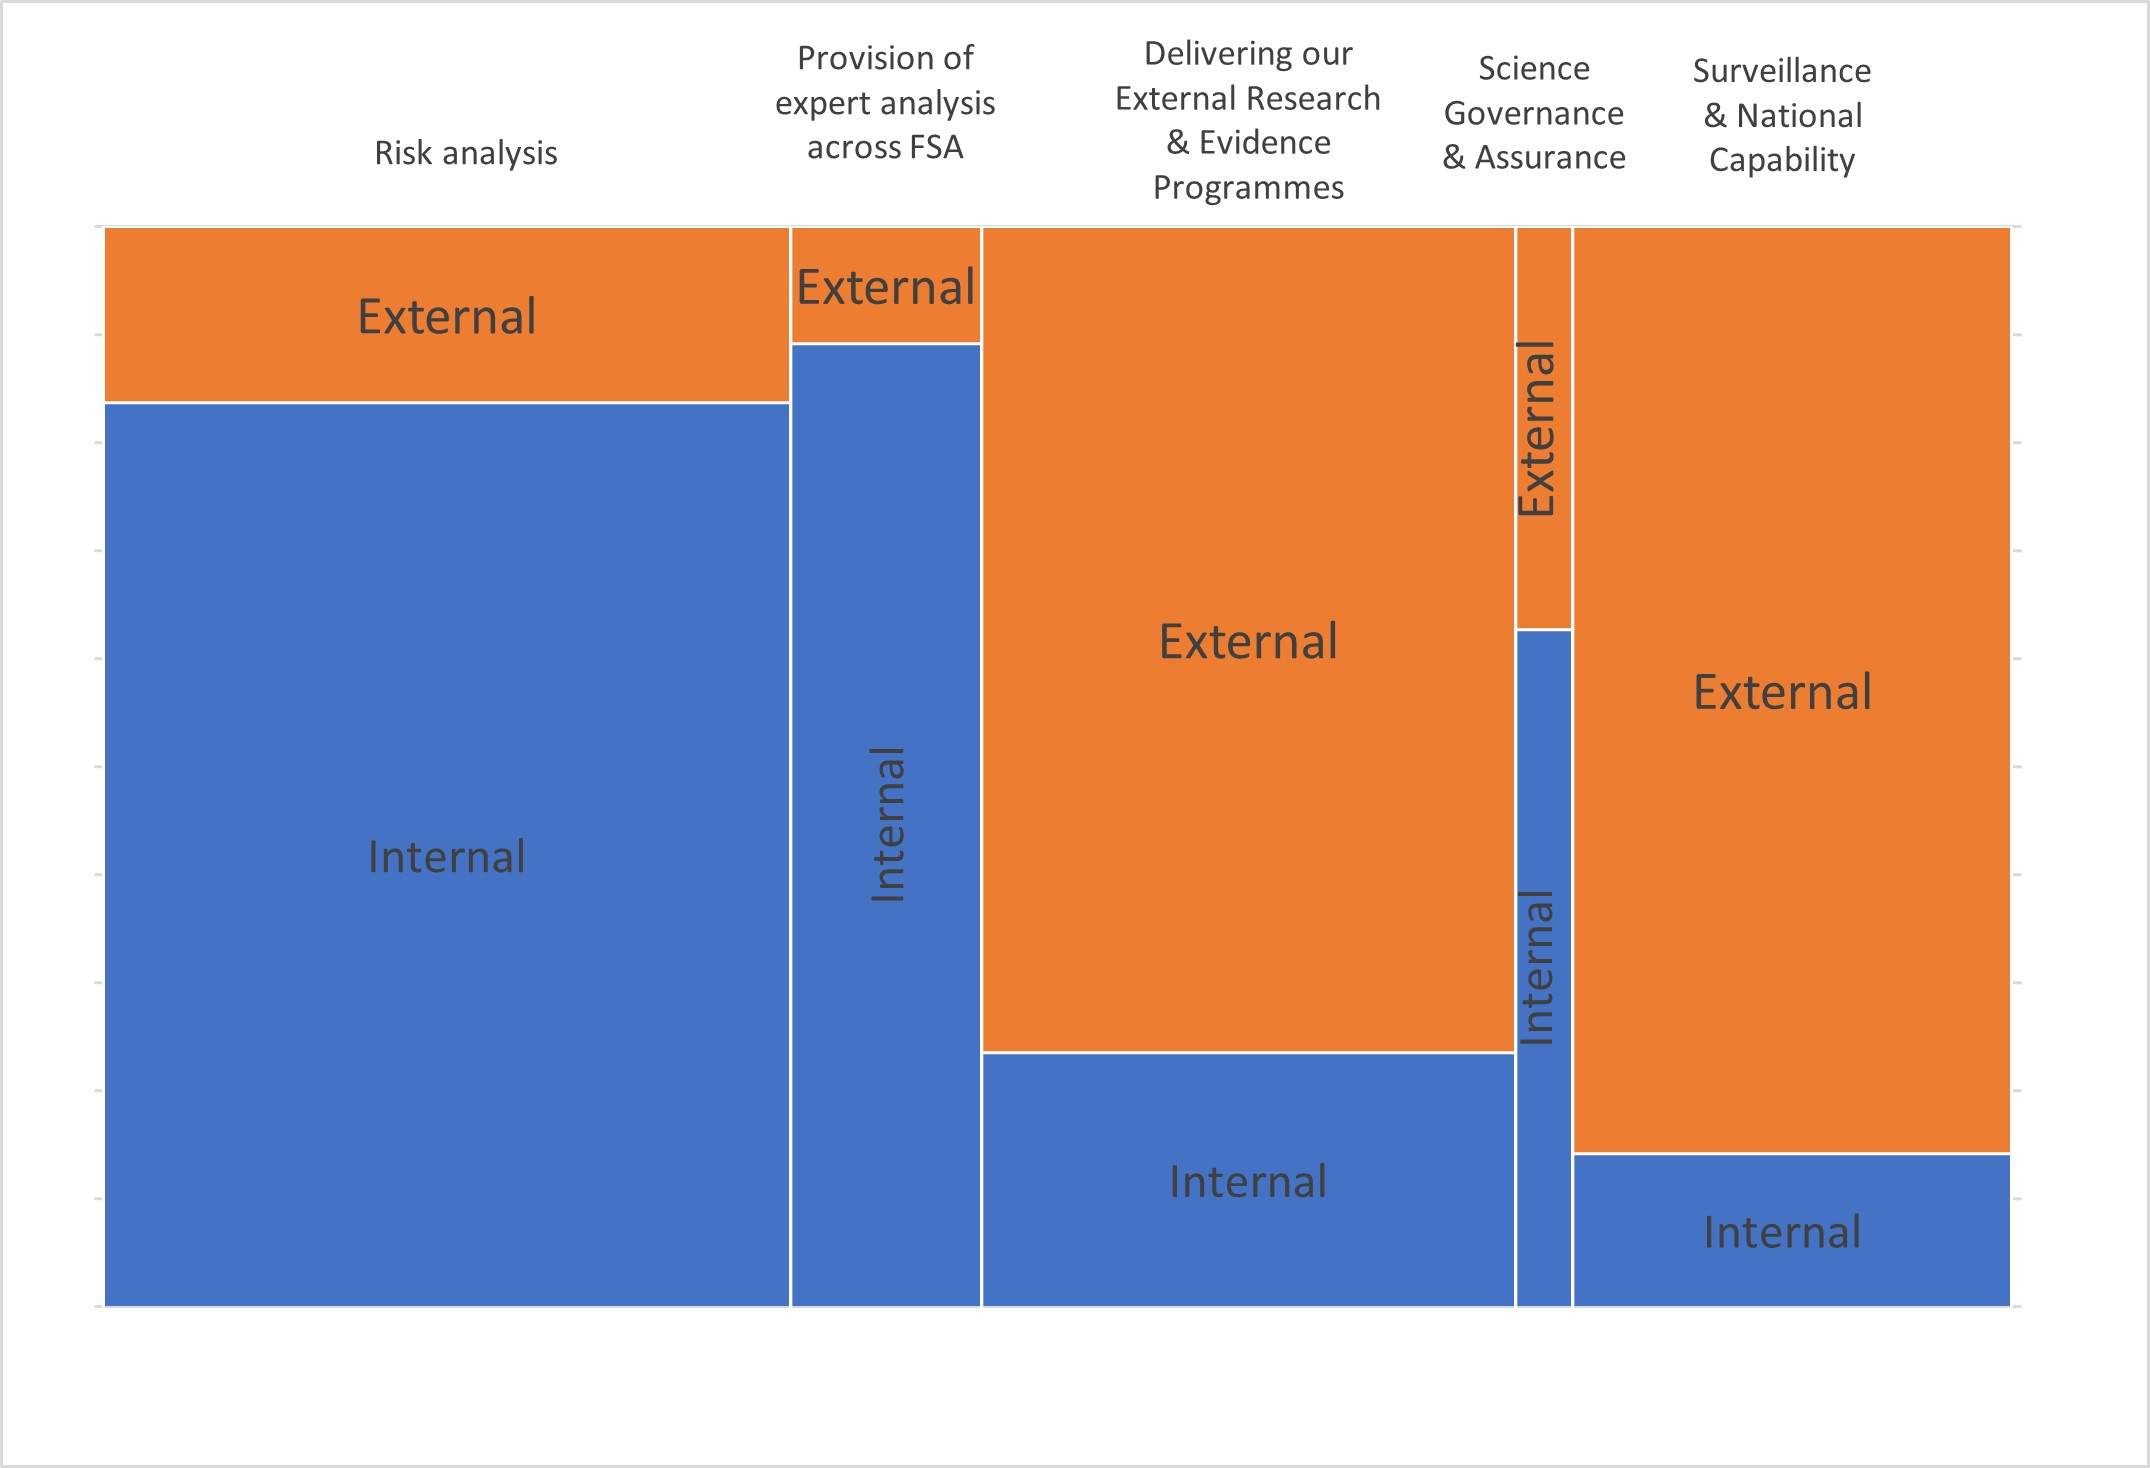 Diagram showing proportions of in-house against external resources across functions.